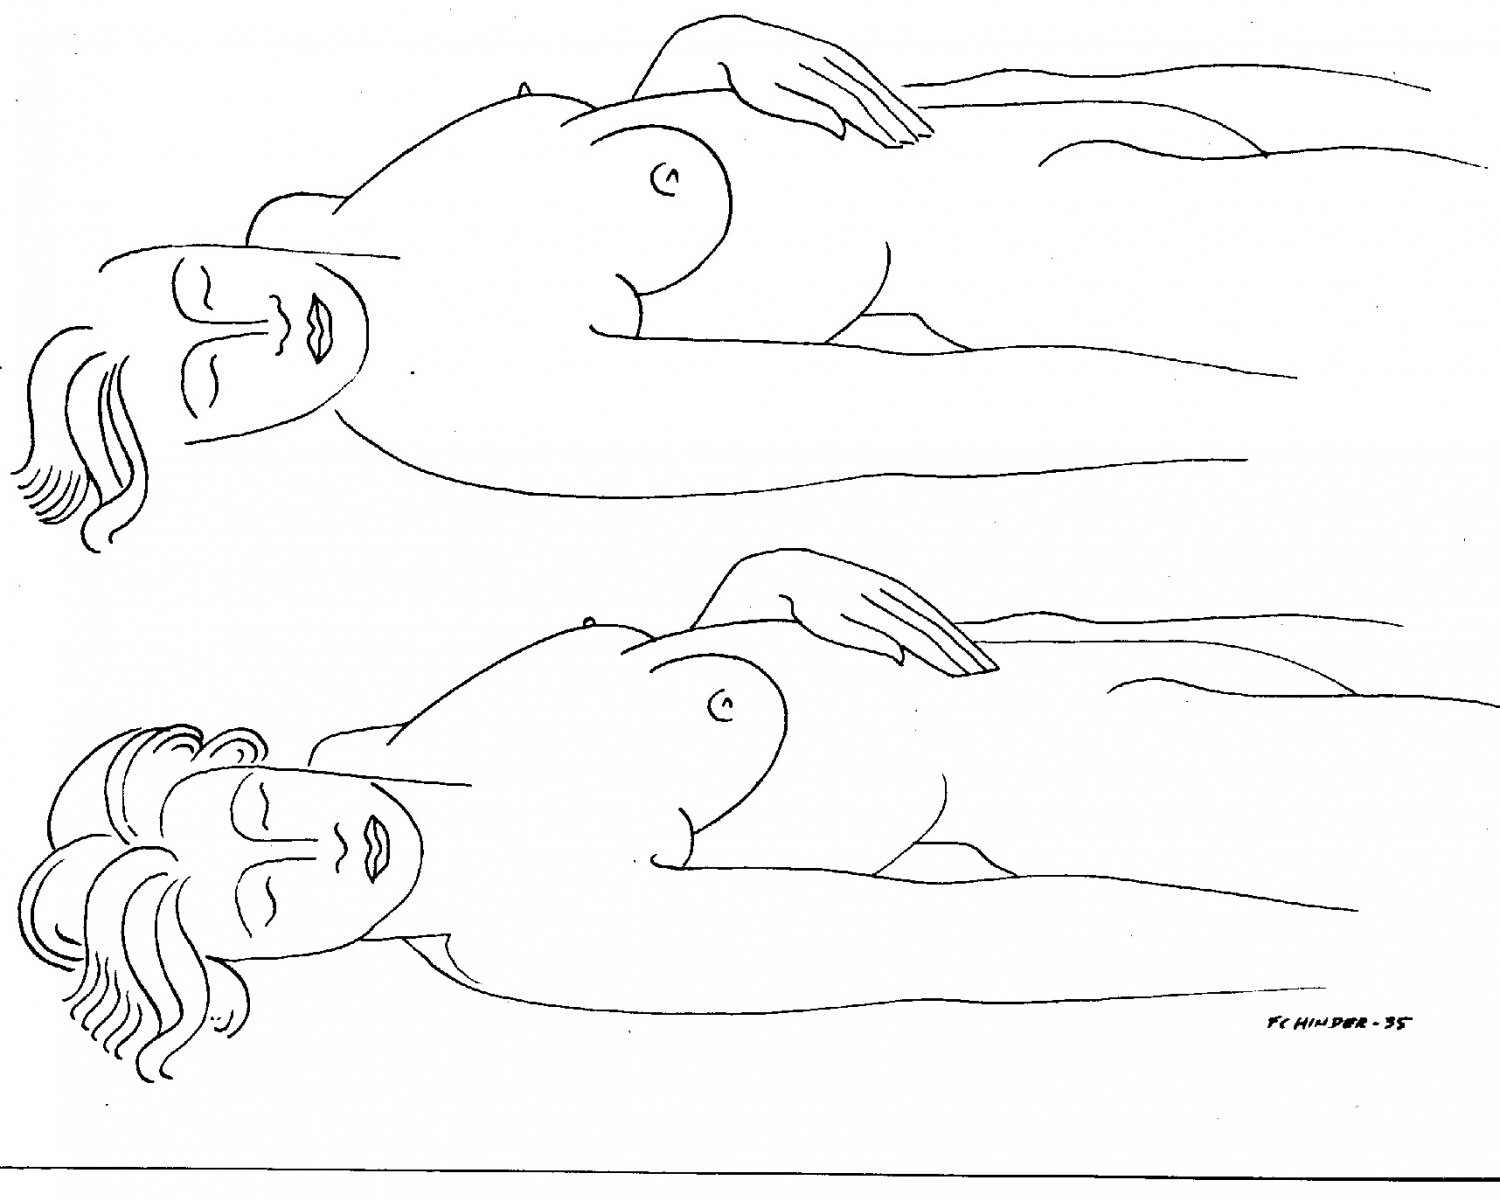 Frank Hinder, Two sleeping outline nudes